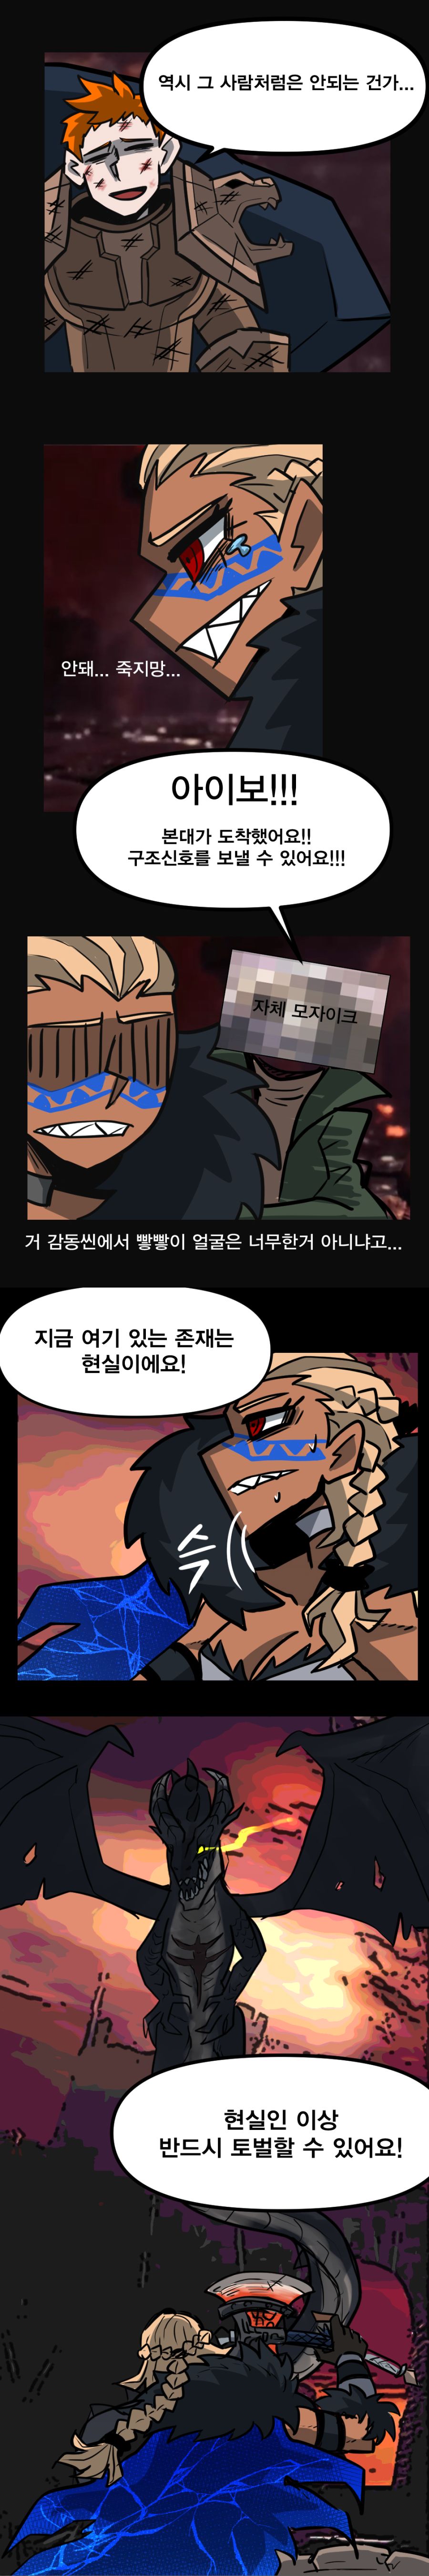 mh1-1완성.png